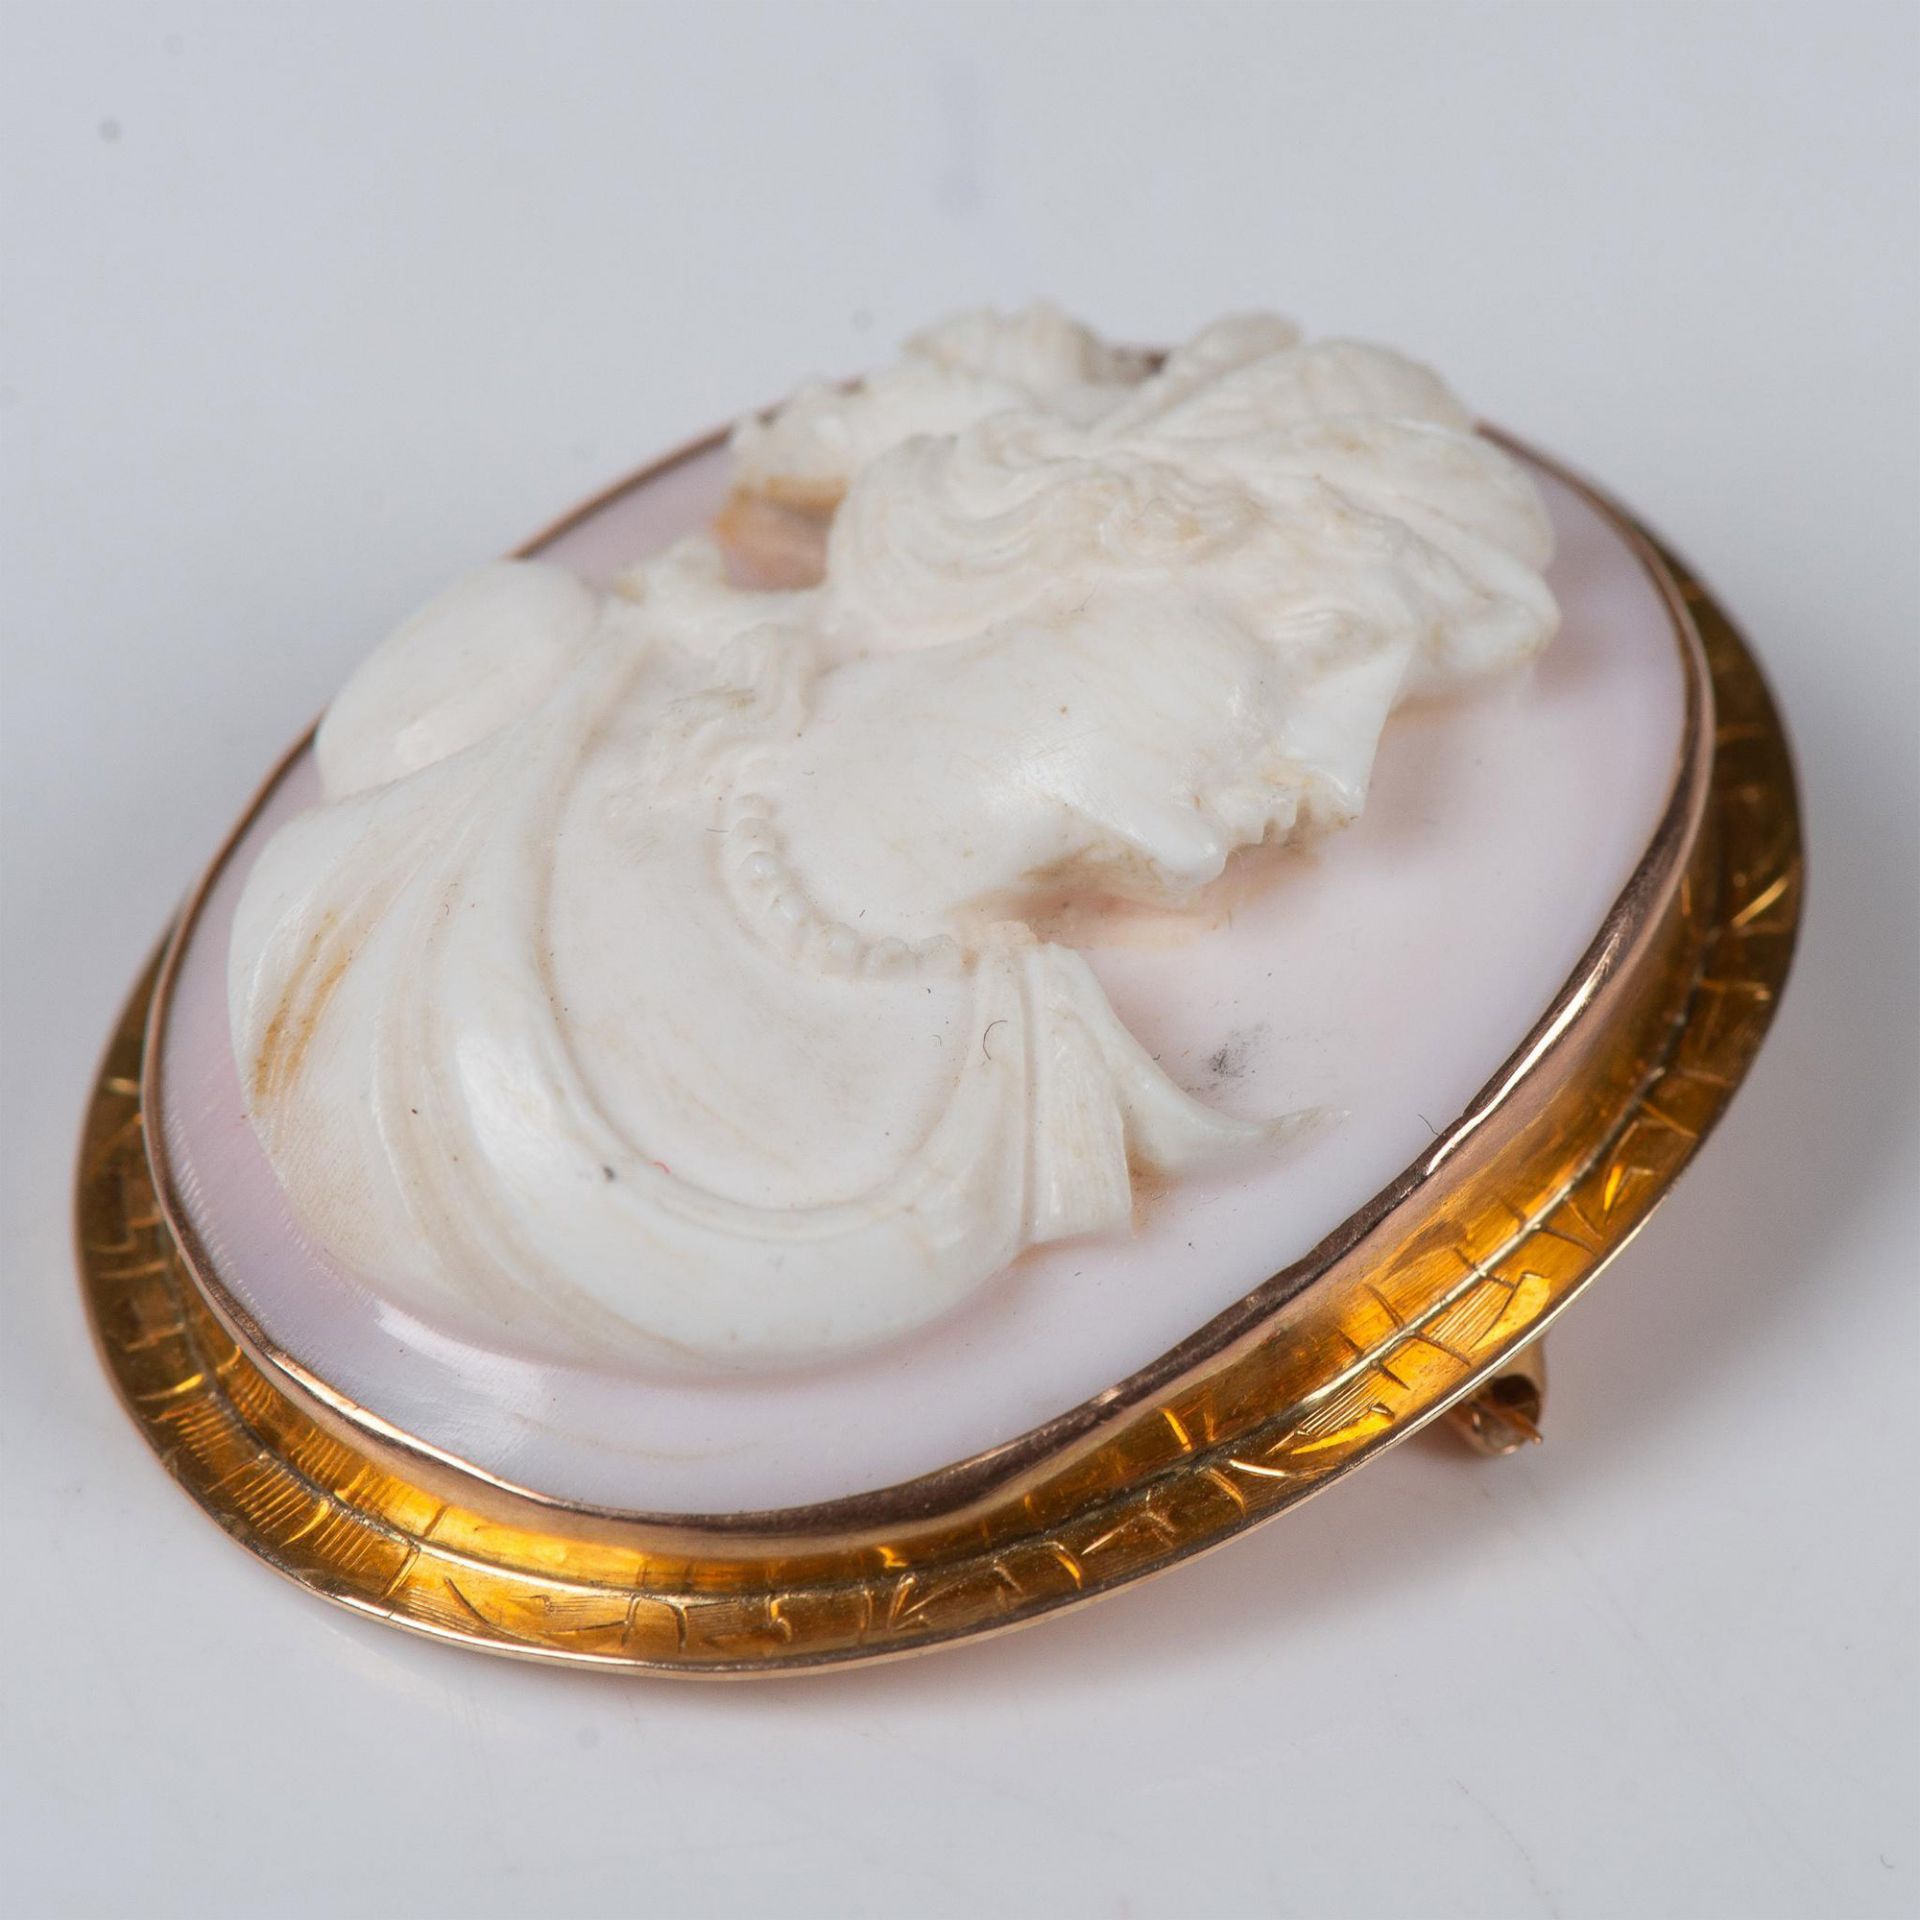 10K Gold Cameo Brooch-Pendant - Image 3 of 3